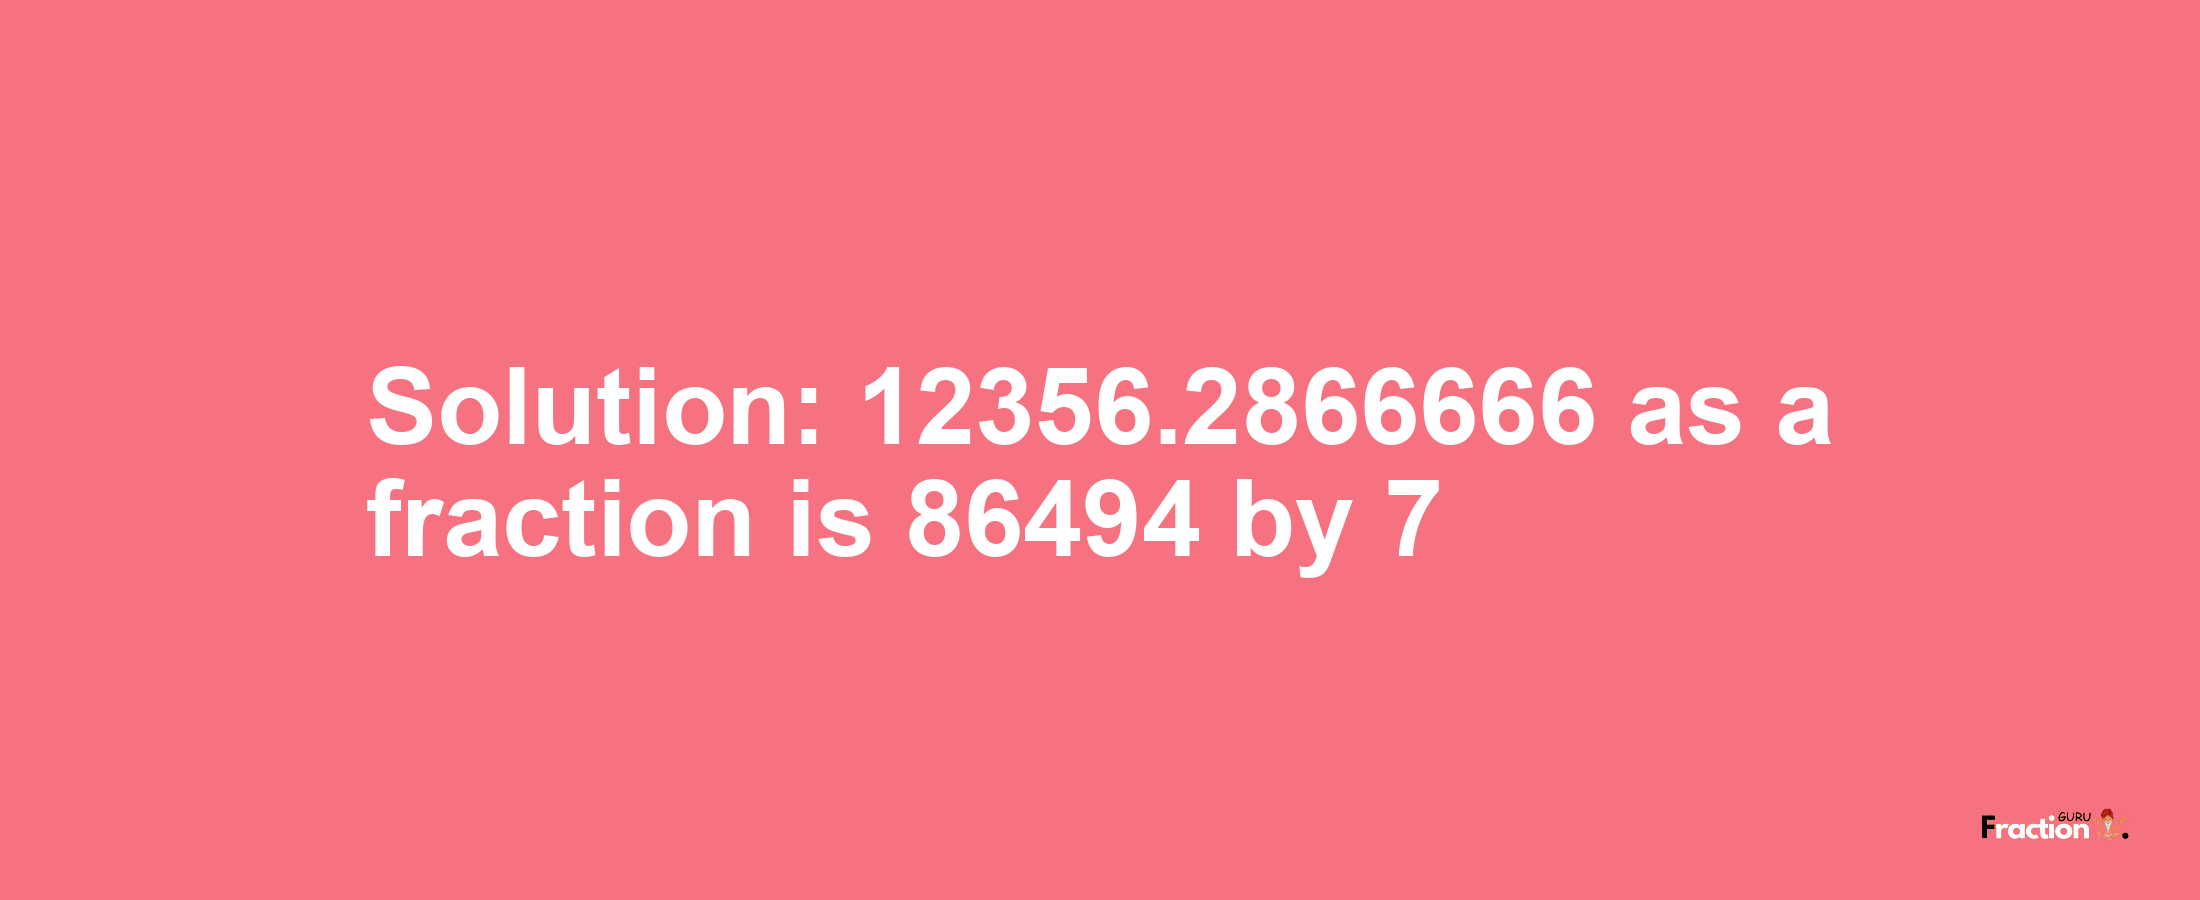 Solution:12356.2866666 as a fraction is 86494/7